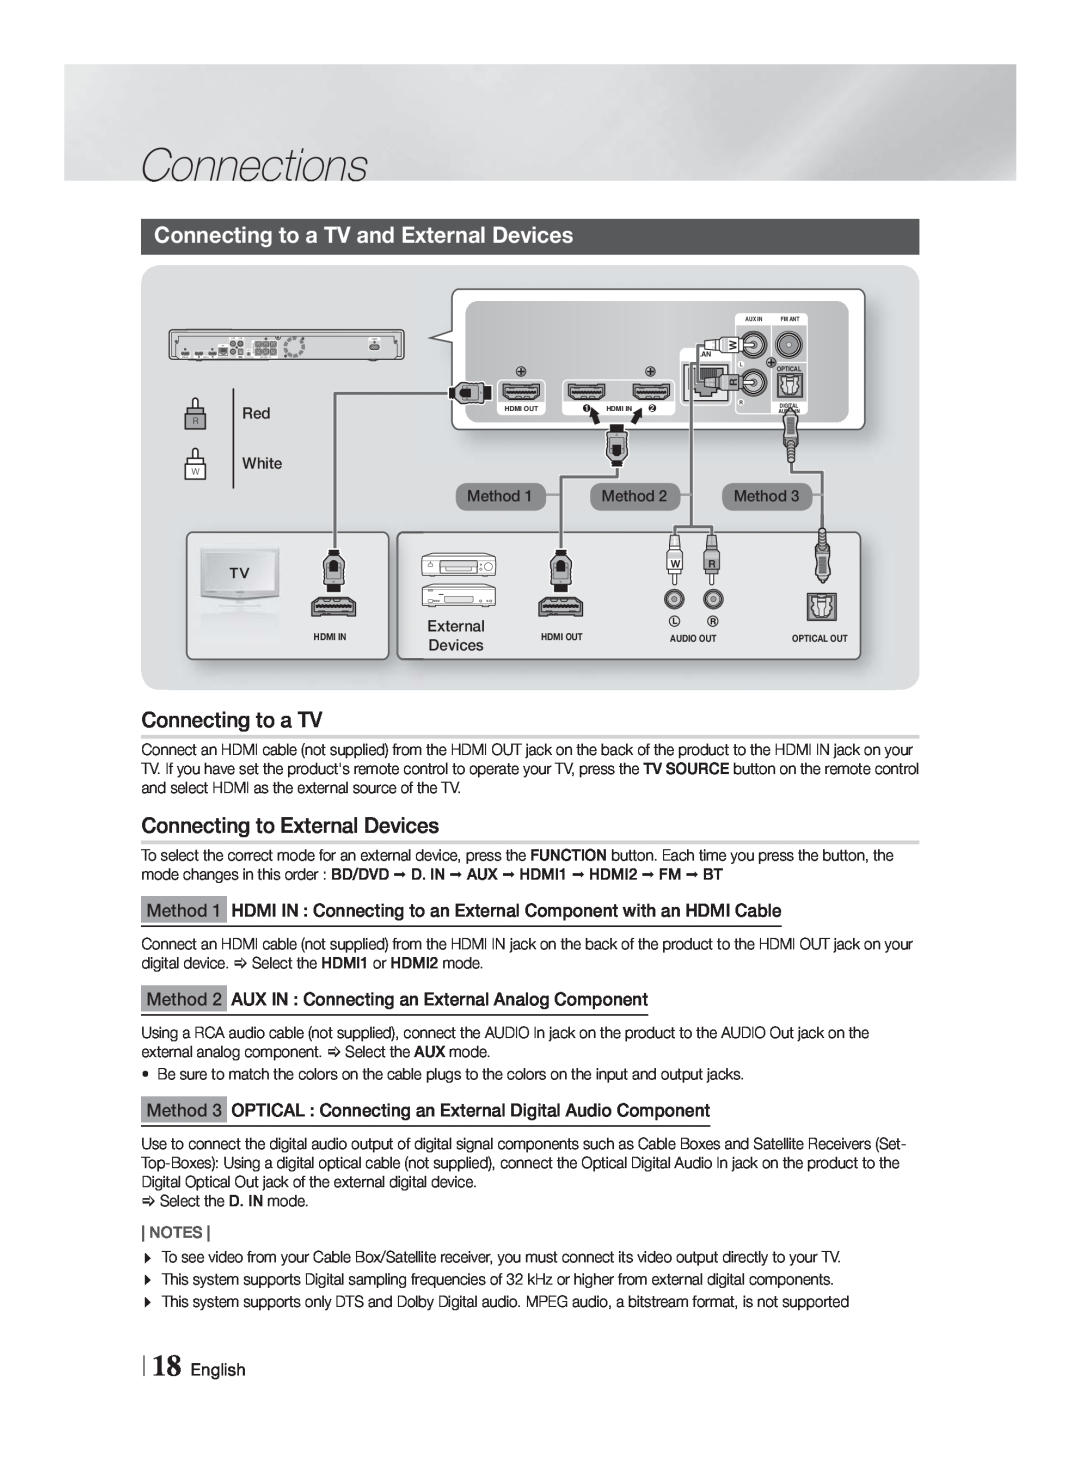 Samsung HT-F9730W/ZA user manual Connecting to a TV and External Devices, Connecting to External Devices, Connections 